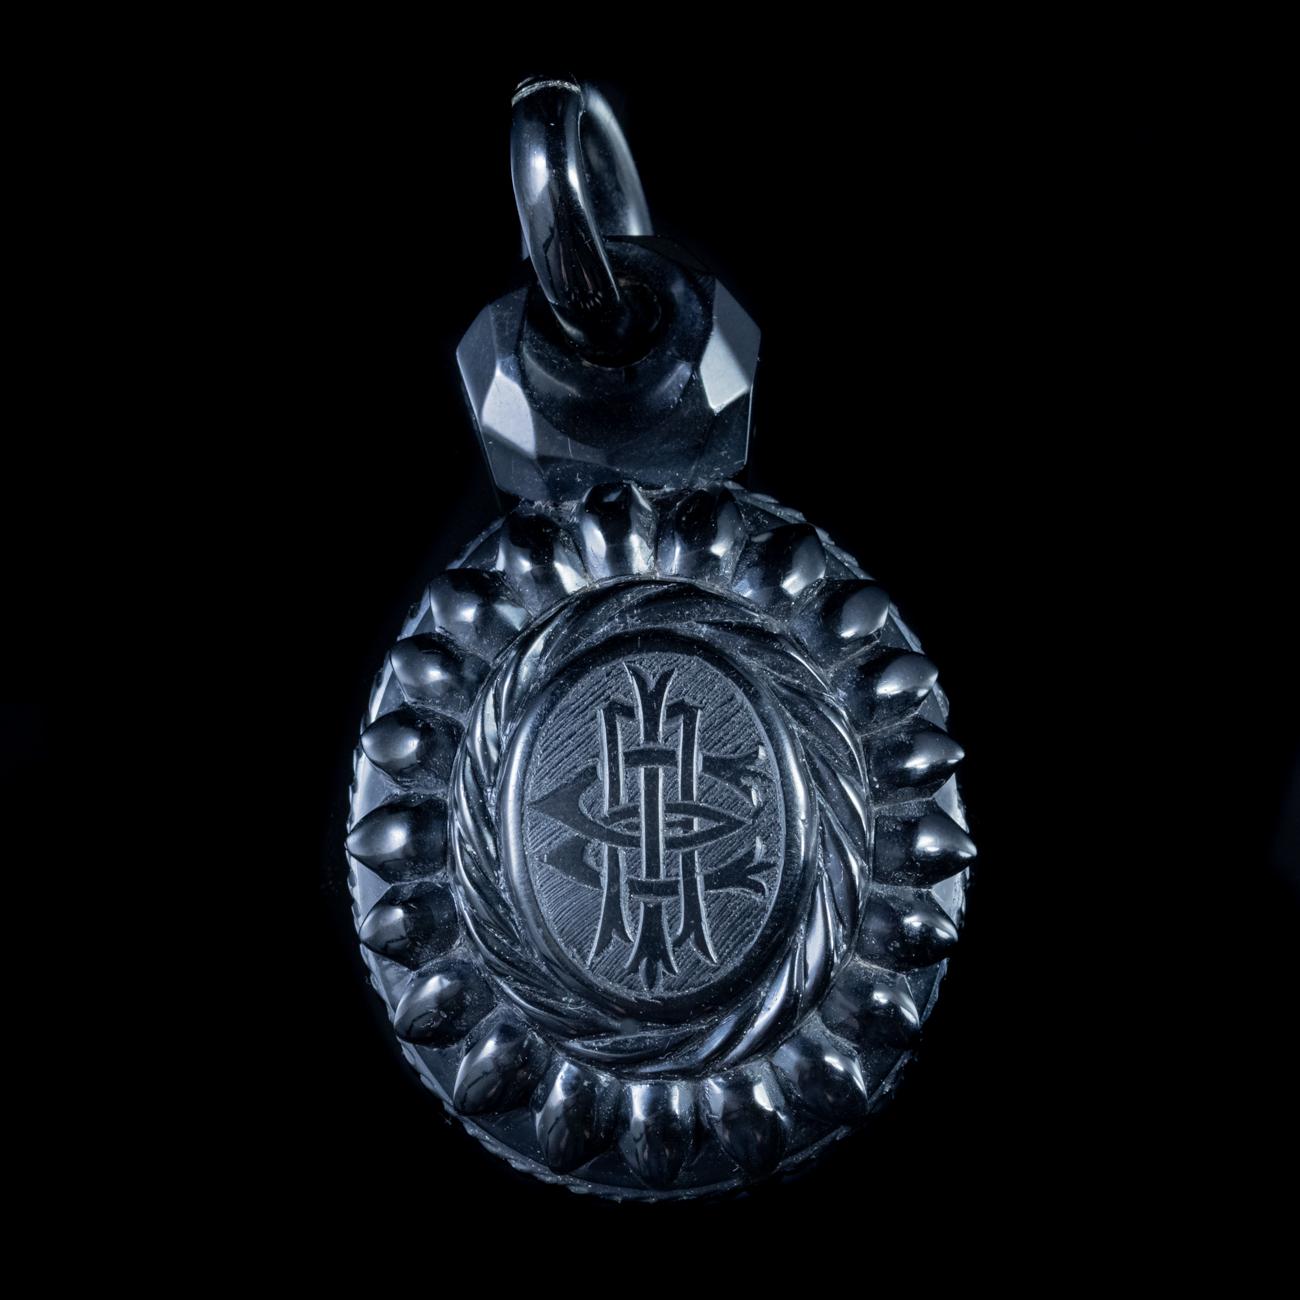 This stunning Antique Victorian pendant locket has been modelled in black Whitby Jet. It is an impressive size and features intricate engravings across the front and edges, as well as a large sculpted bale.

It is in excellent condition all round